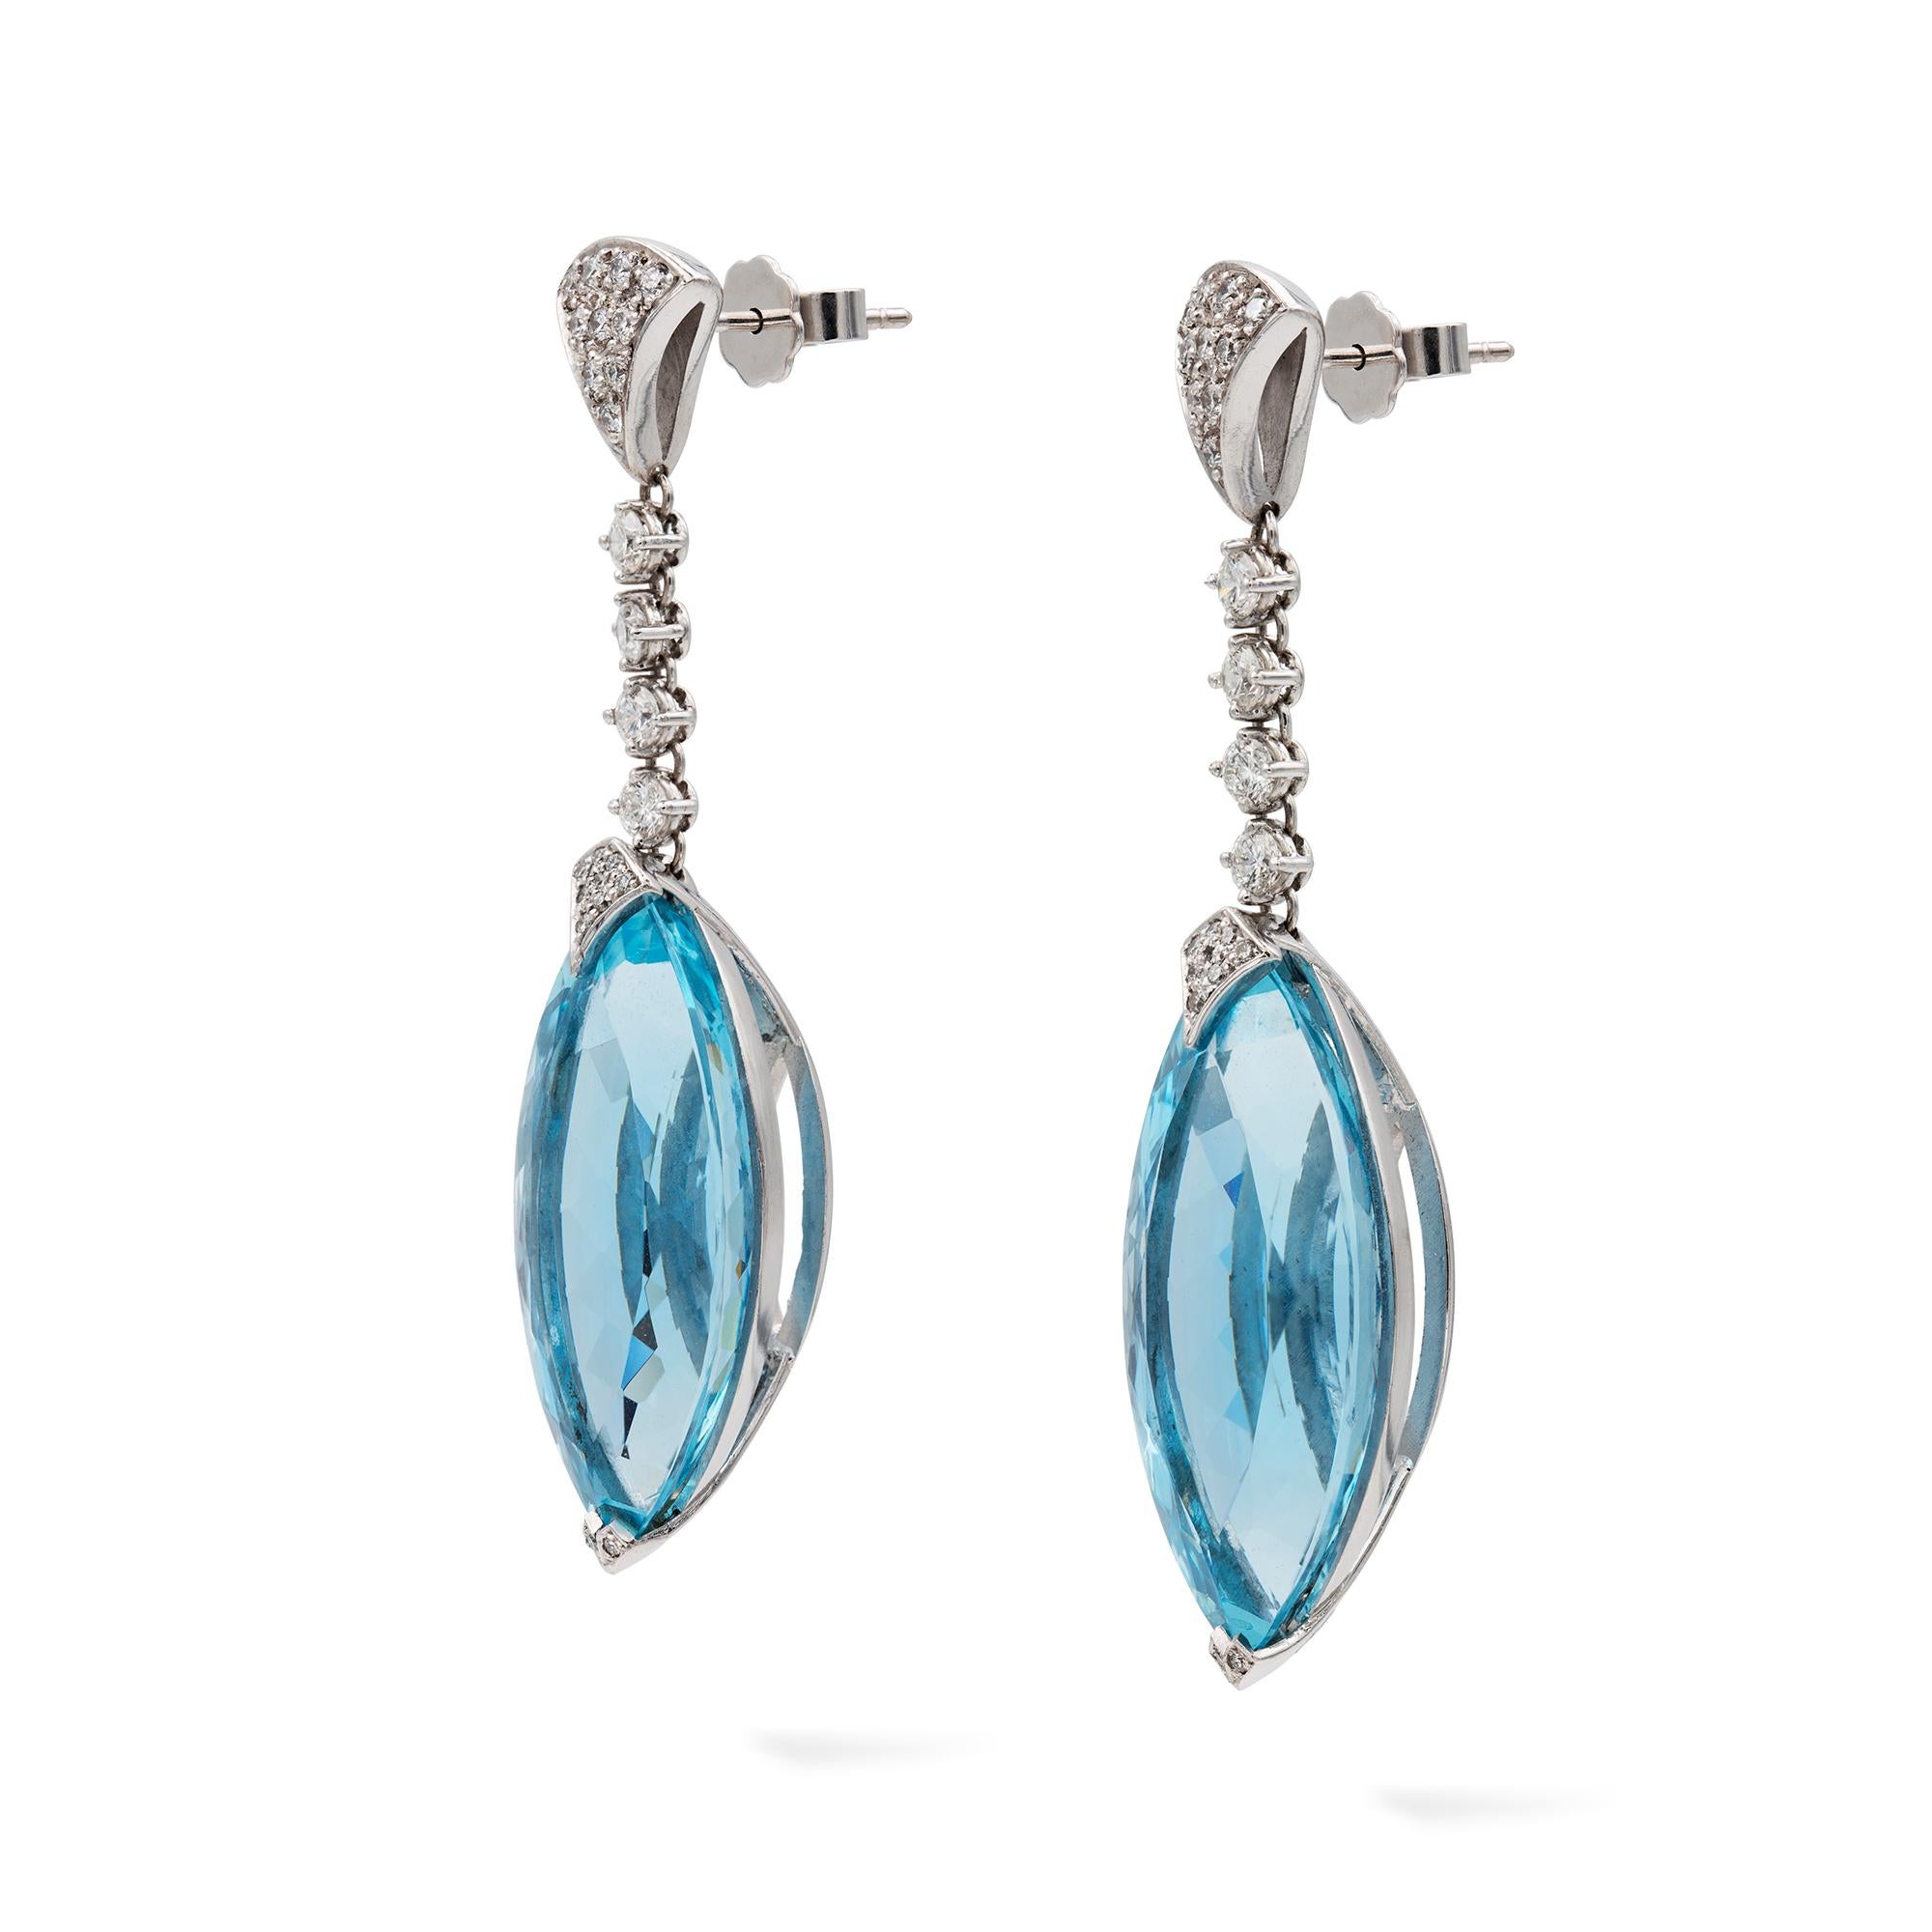 A pair of aquamarine and diamond drop earrings, each earring with a triangular shaped top encrusted with small round brilliant-cut diamonds, suspending a run consisting of four round-brilliant-cut diamonds, terminating to a marquise-cut aquamarine,